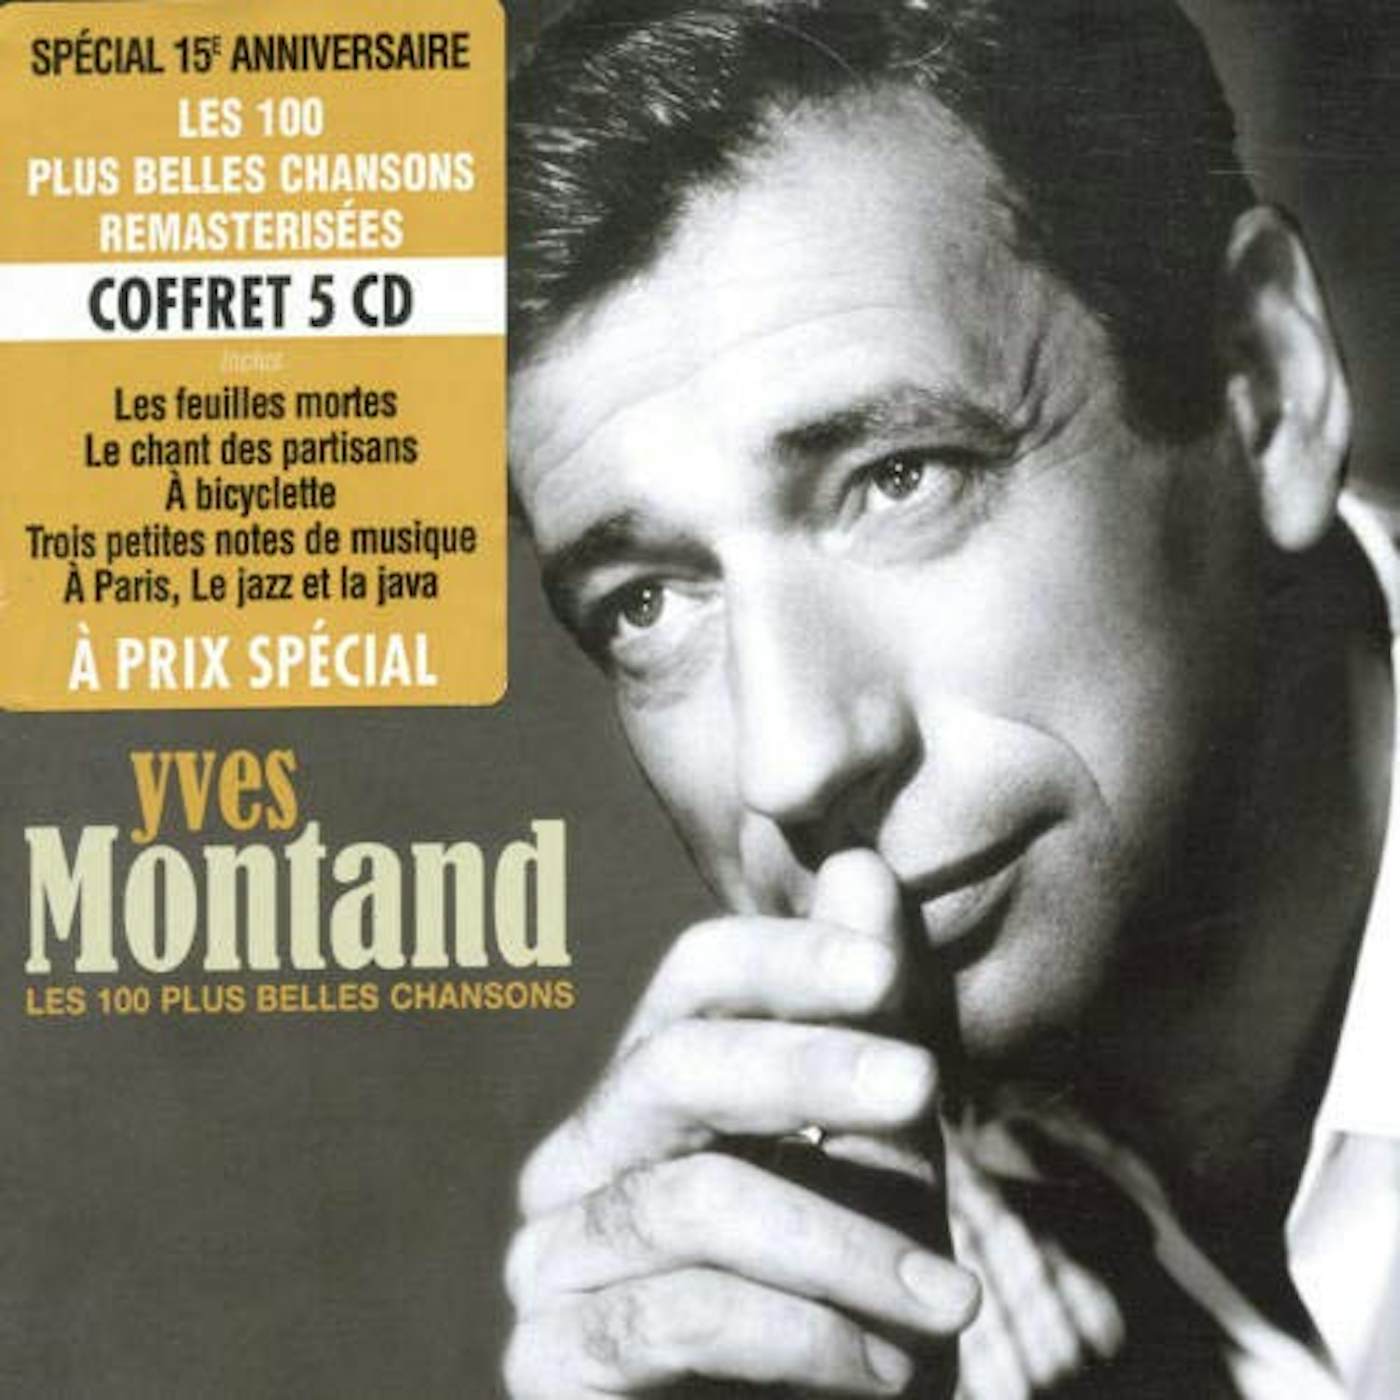 Yves Montand THE CHANSON COLLECTION CD